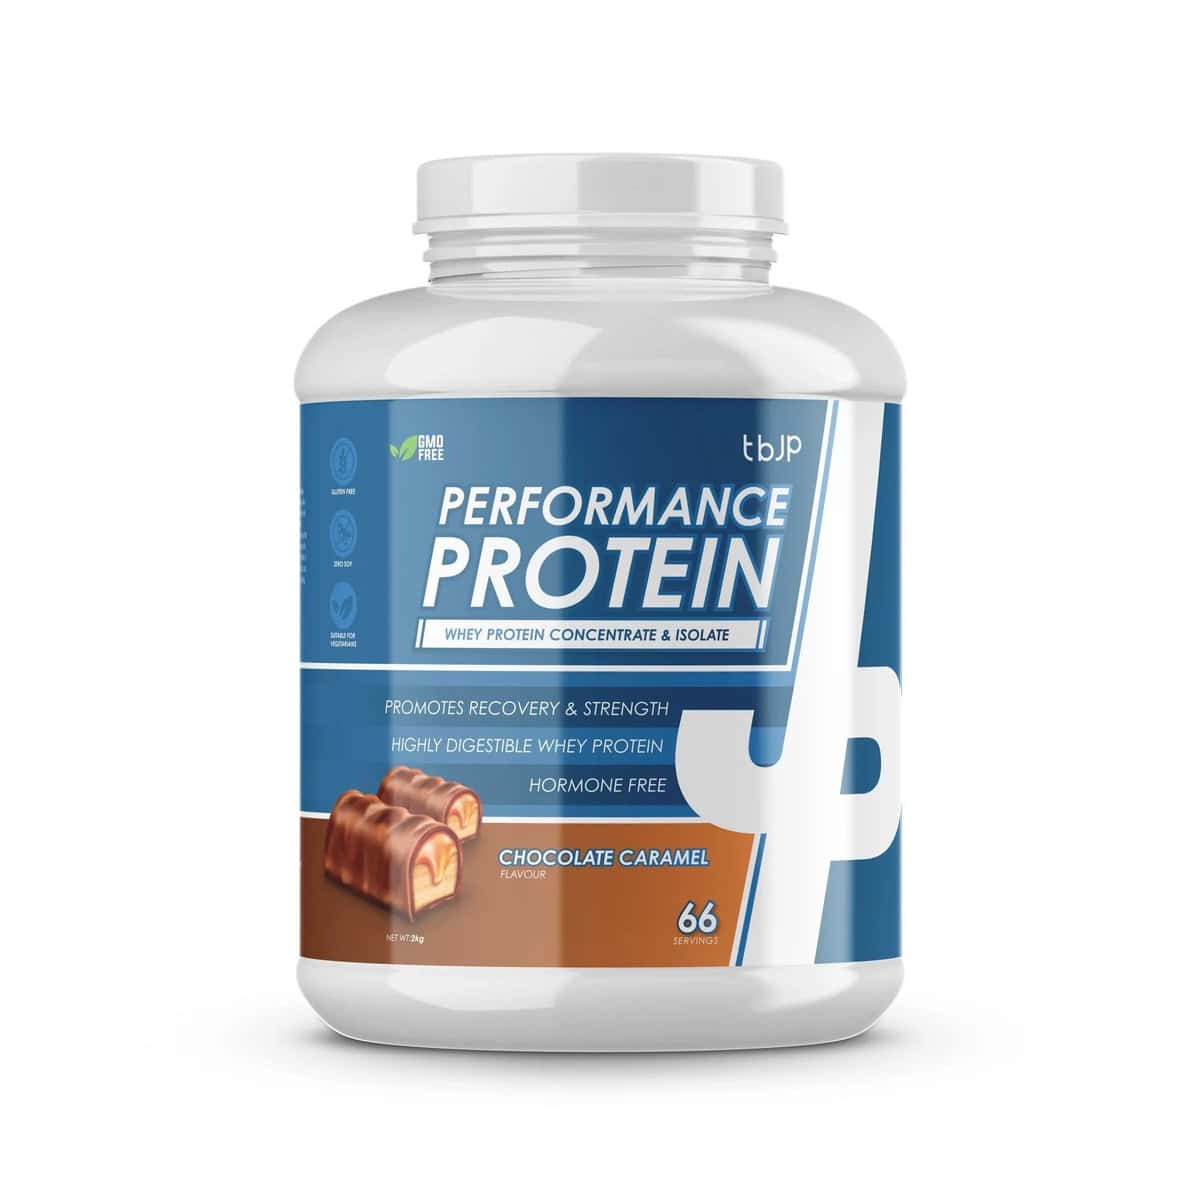 TBJP Performance Whey Protein